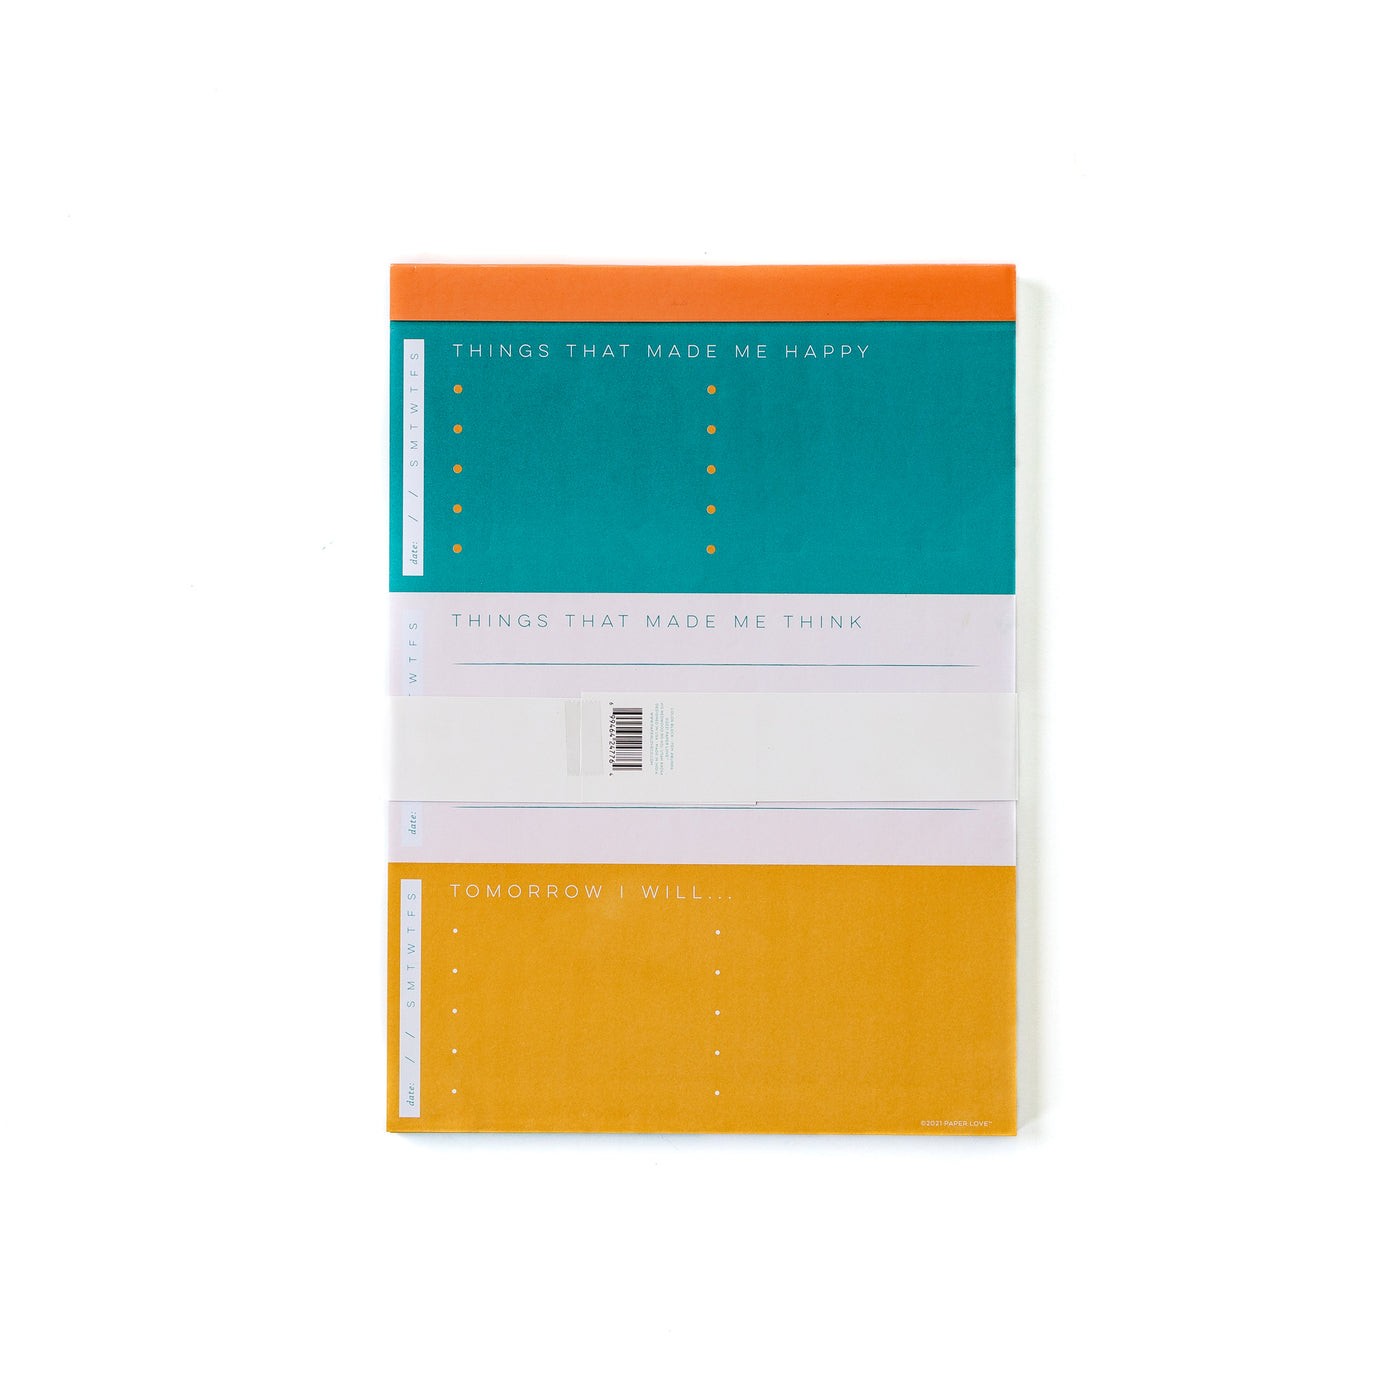 Retro Color Block Guided Notepad Set